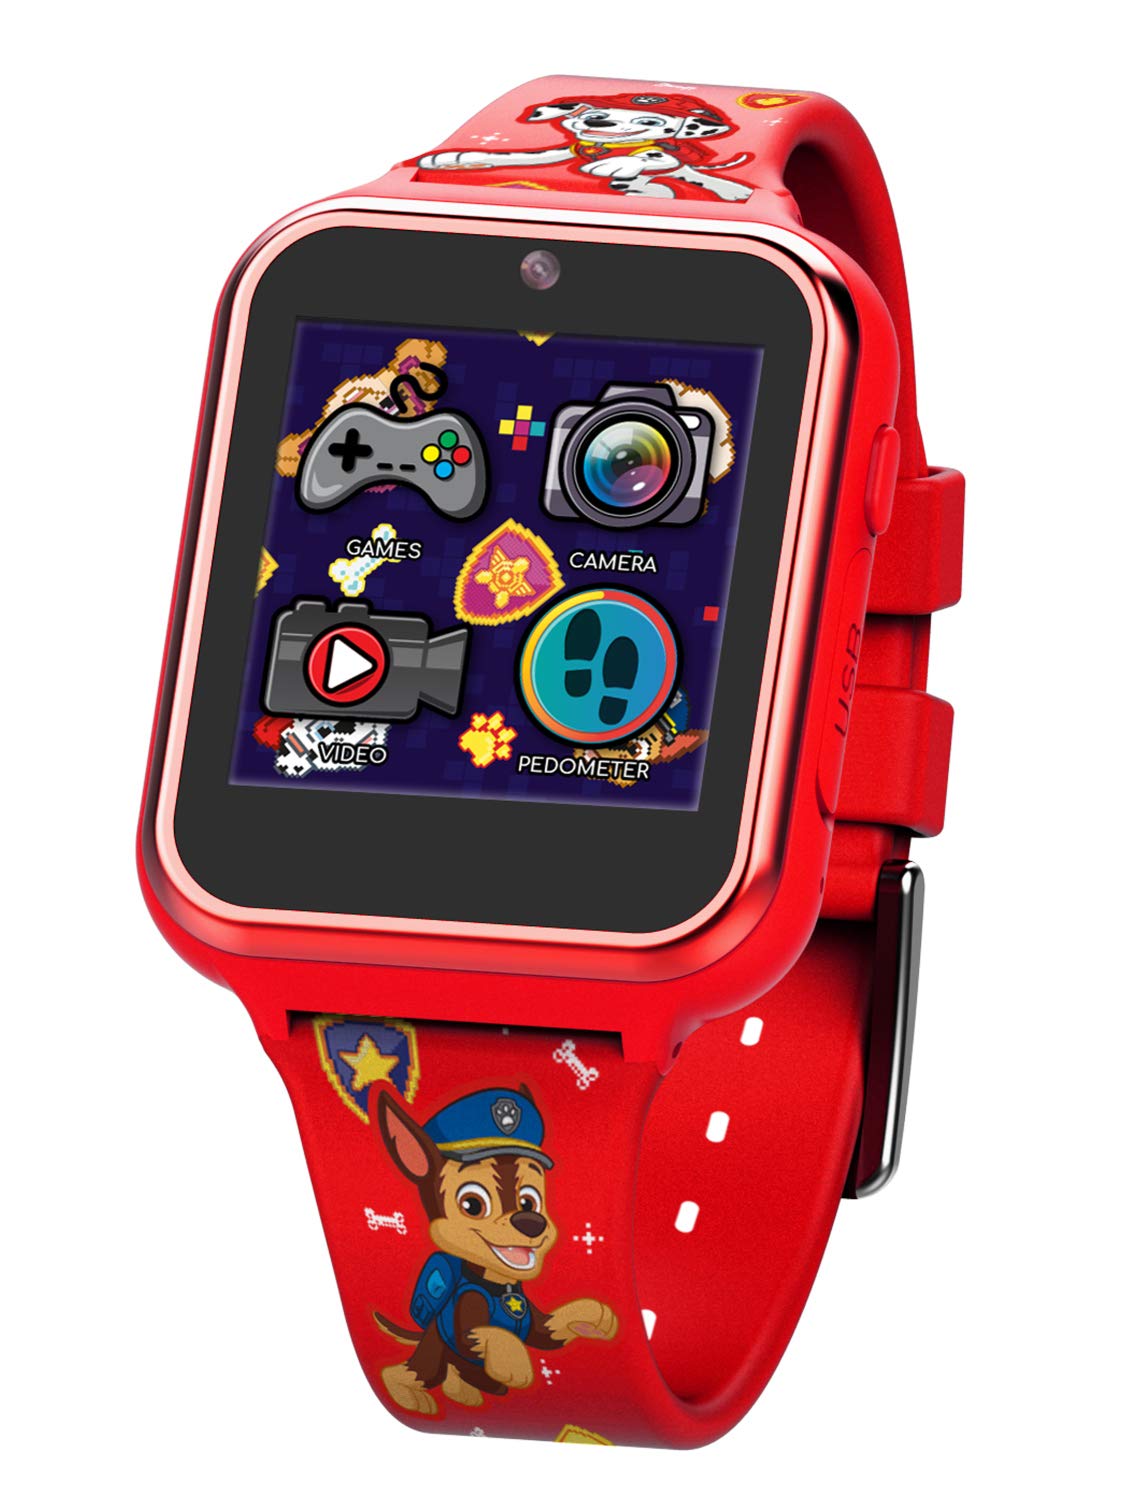 Accutime Paw Patrol Smart Watch with Camera for Kids and Toddlers - Interactive Smartwatch for Boys & Girls Featuring Games, Voice Recorder, Calculator, Pedometer, Alarm, Stopwatch, with USB Cable